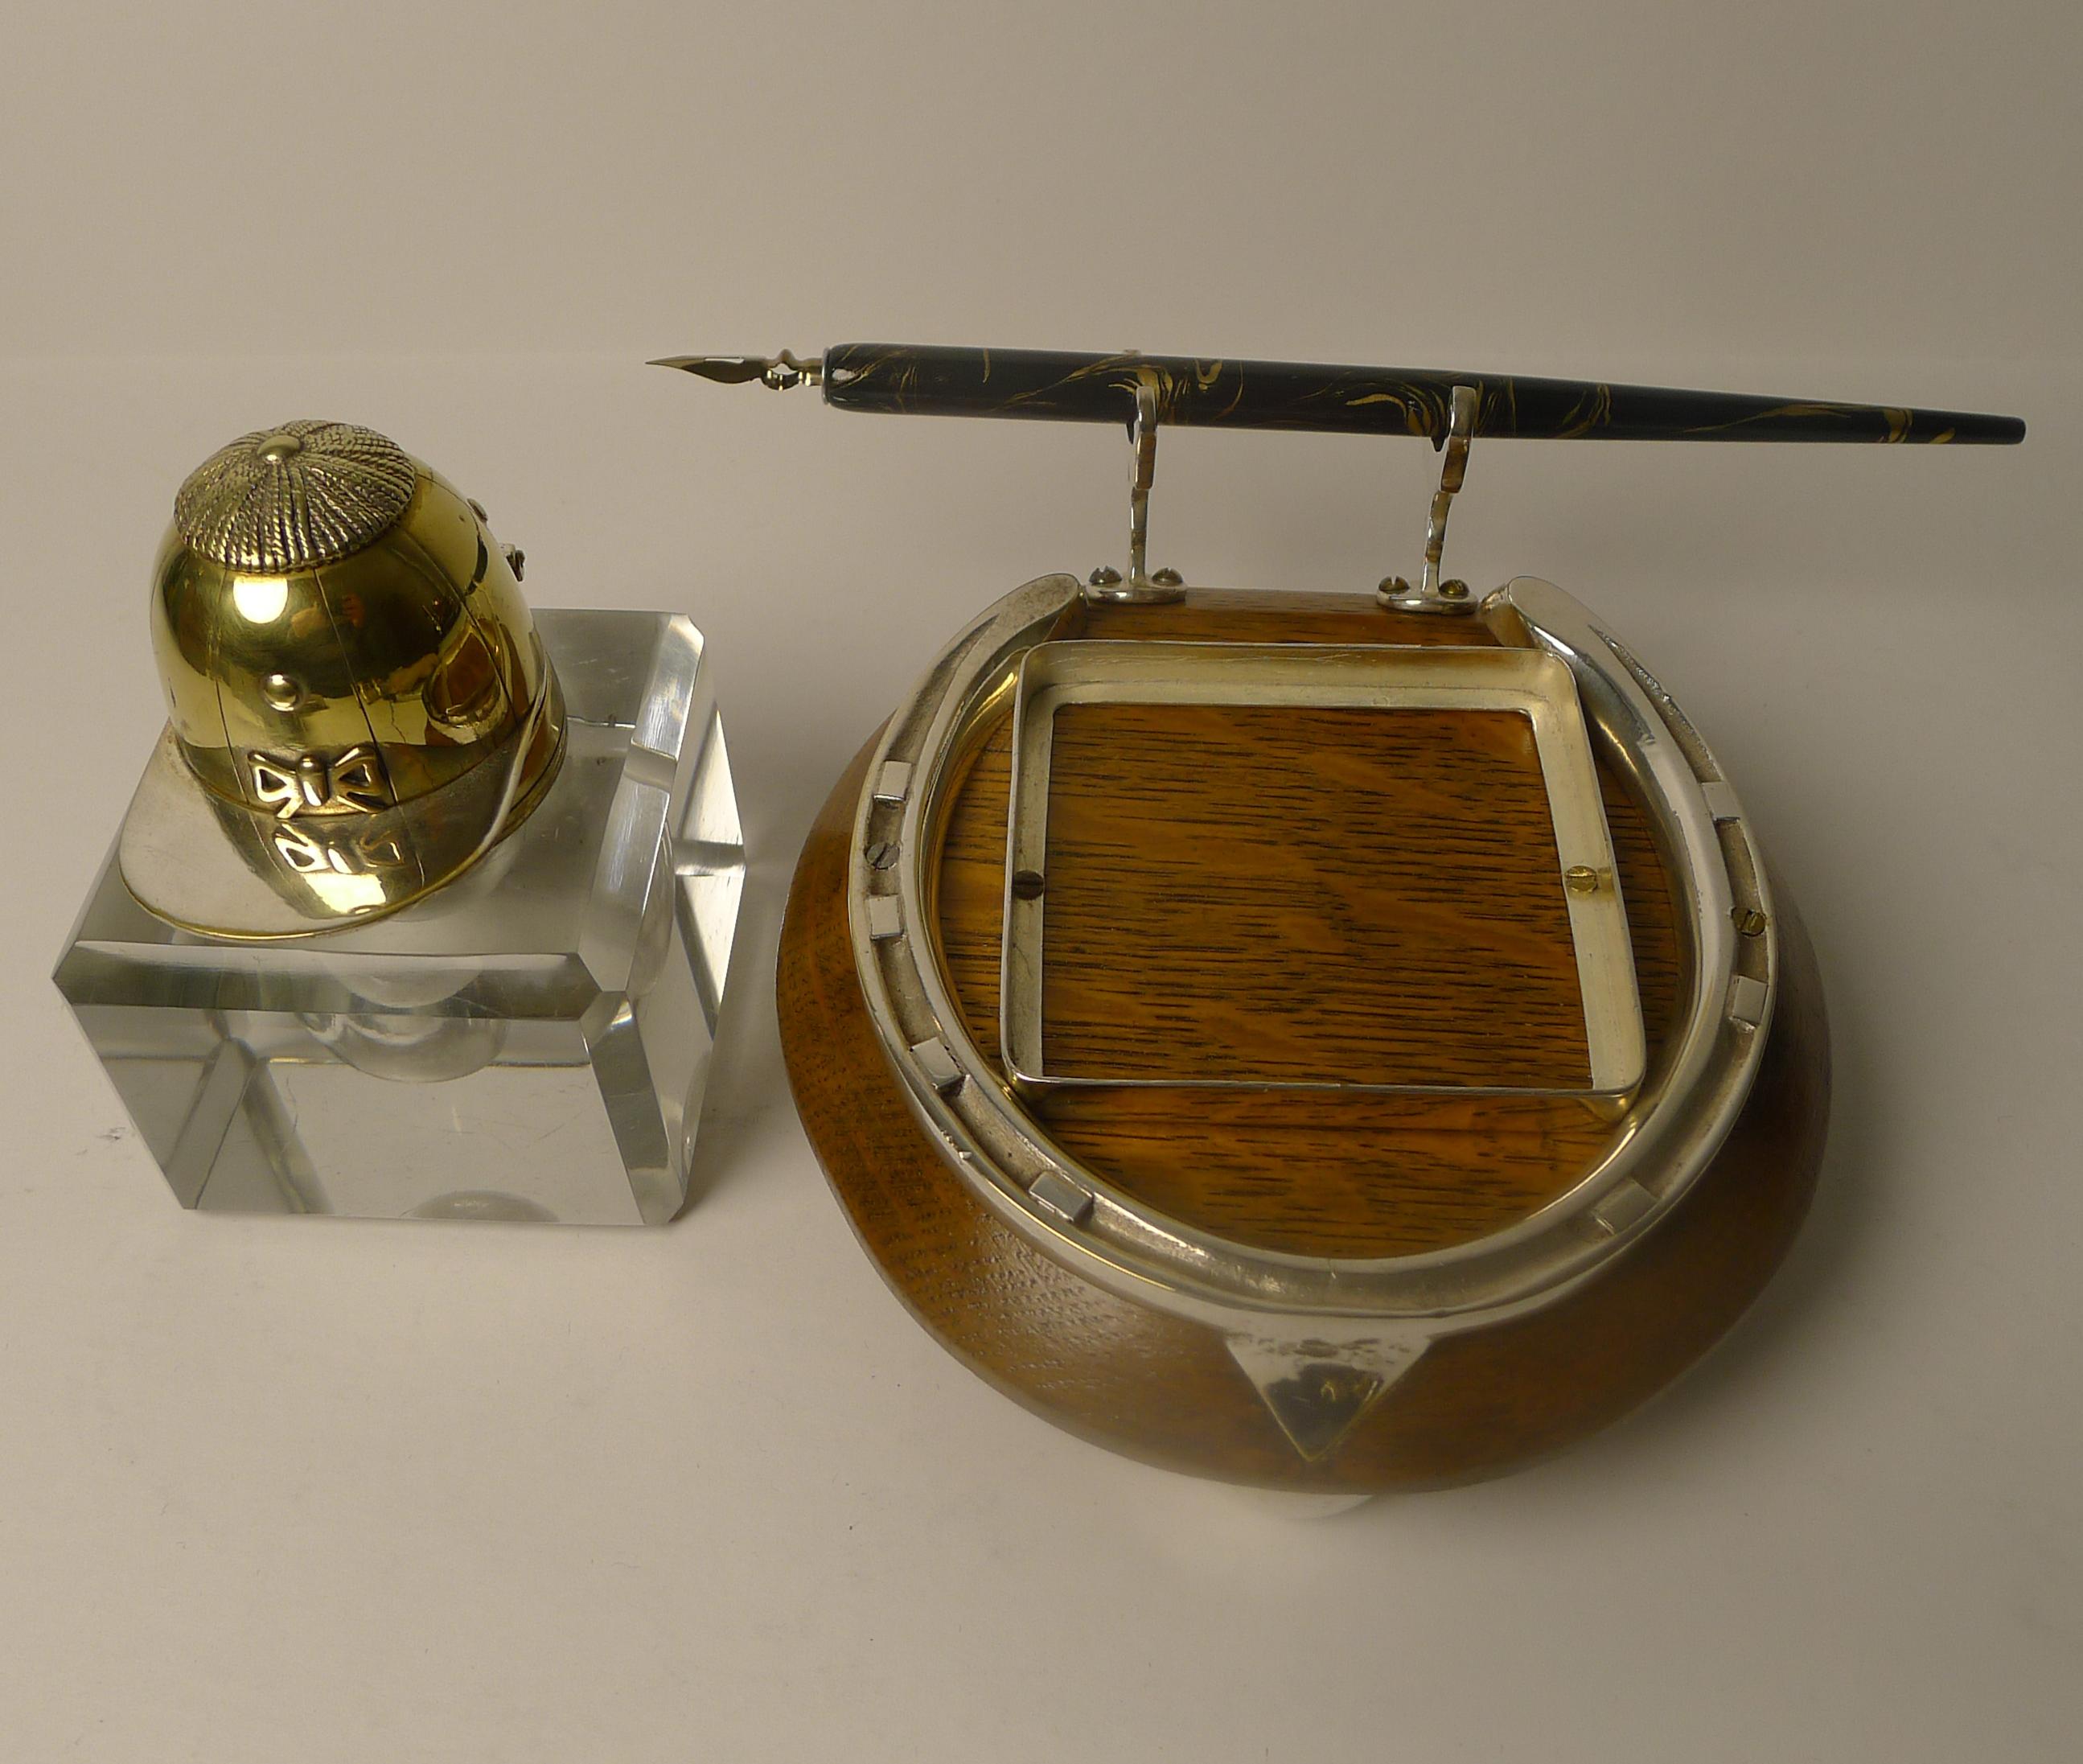 A handsome Horseshoe shaped inkstand, the base made from solid English Oak mounted with a silver plated horseshoe and a square gallery to secure the glass inkwell.

The glass inkwell is topped with a hinged brass lid in the form of a Jockey's cap